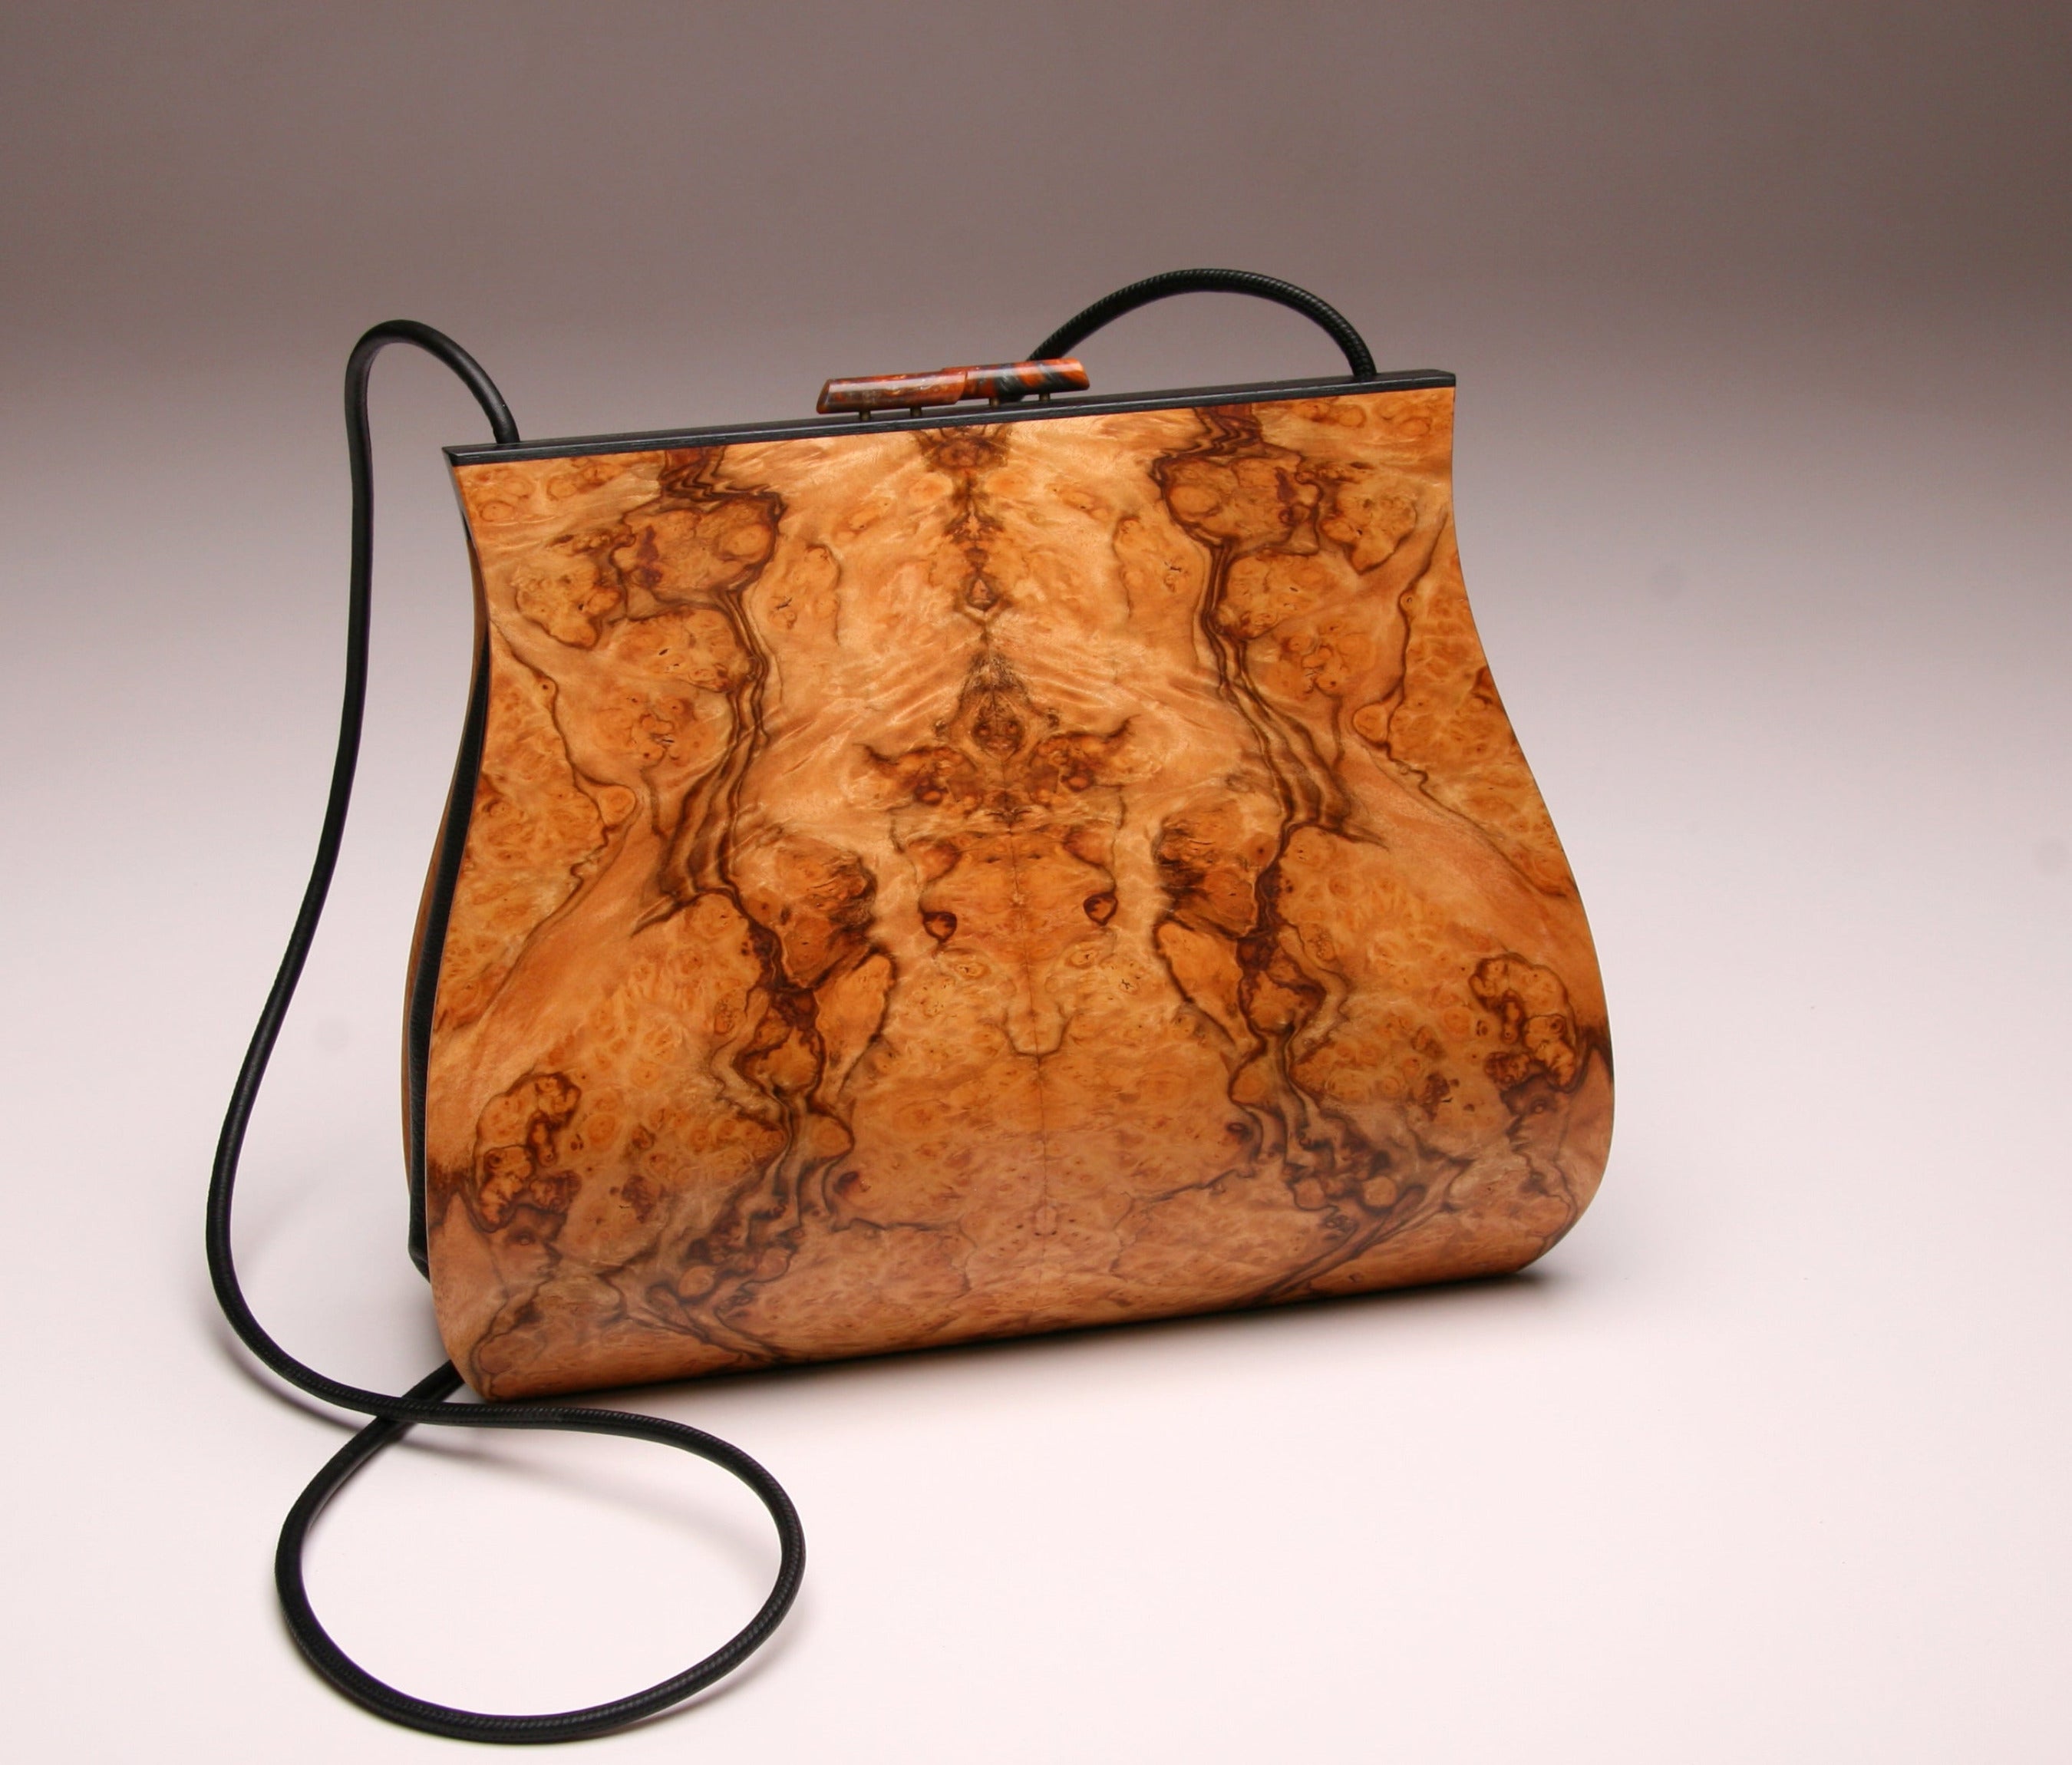 "Dianella" Large Handbag Single Strap in Book-Matched Pepperwood Burl (Allow 3-4 weeks for shipping)